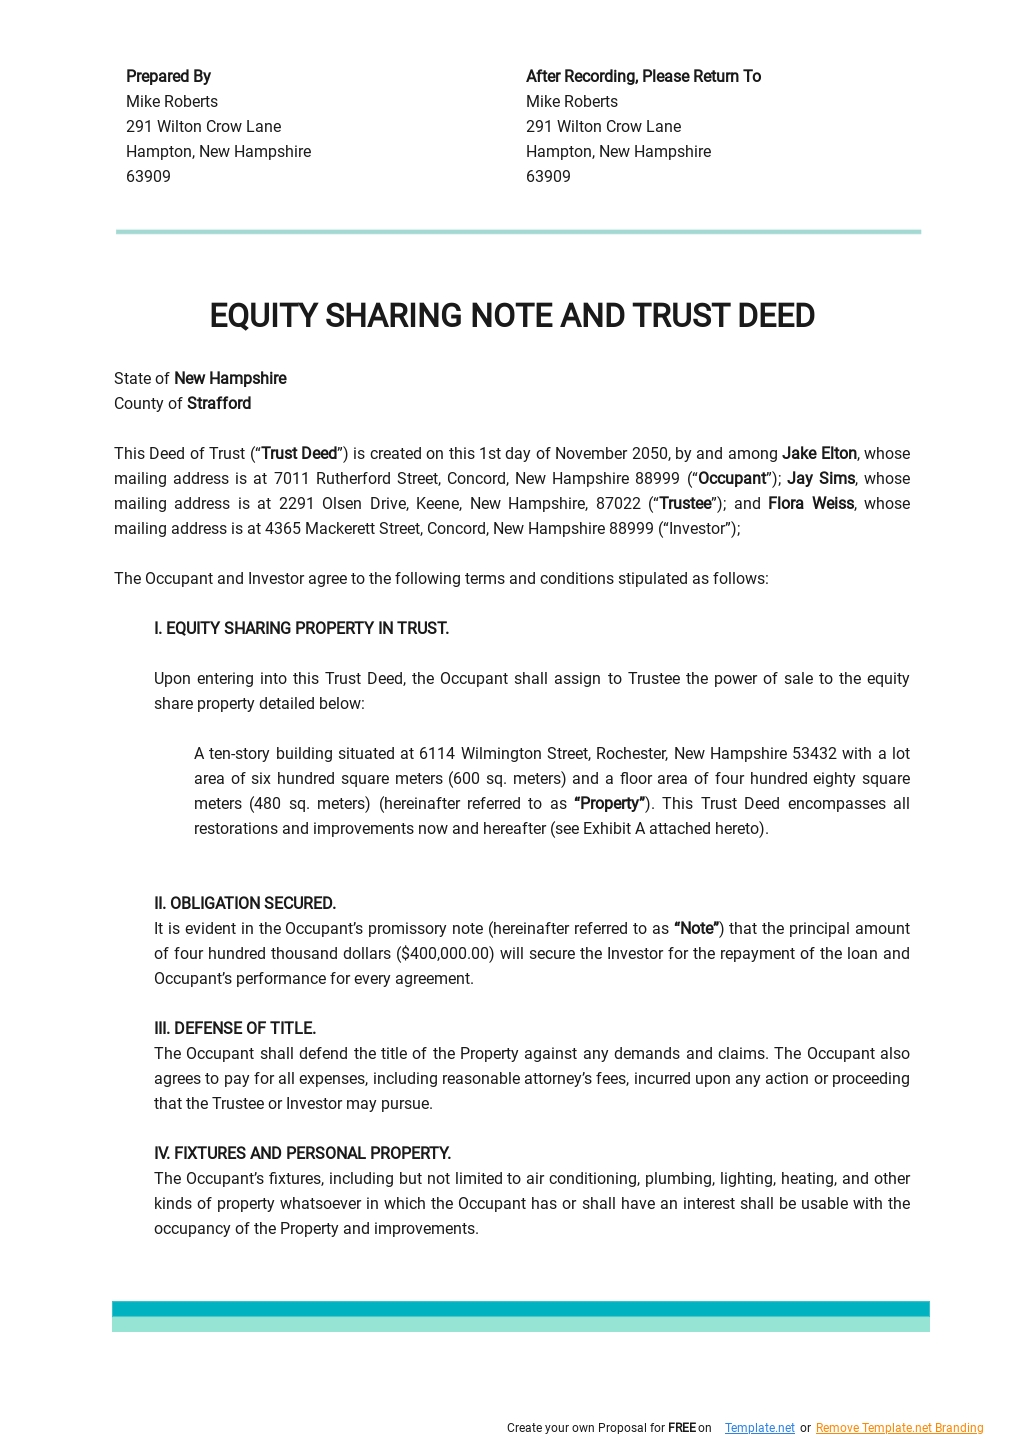 Equity Sharing Note and Trust Deed Template